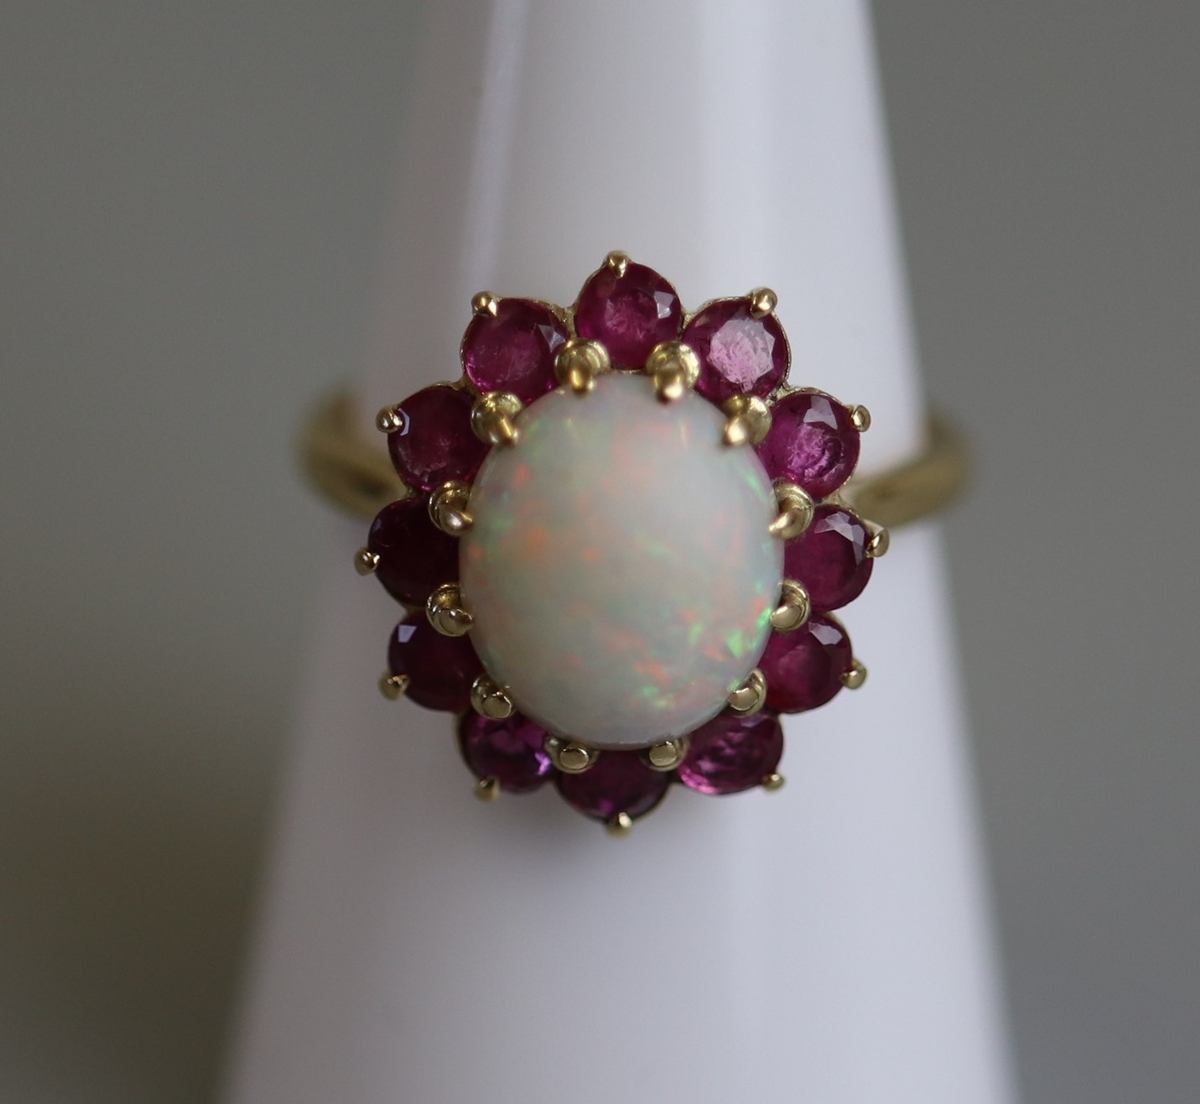 18ct gold opal & ruby set ring - Size M½